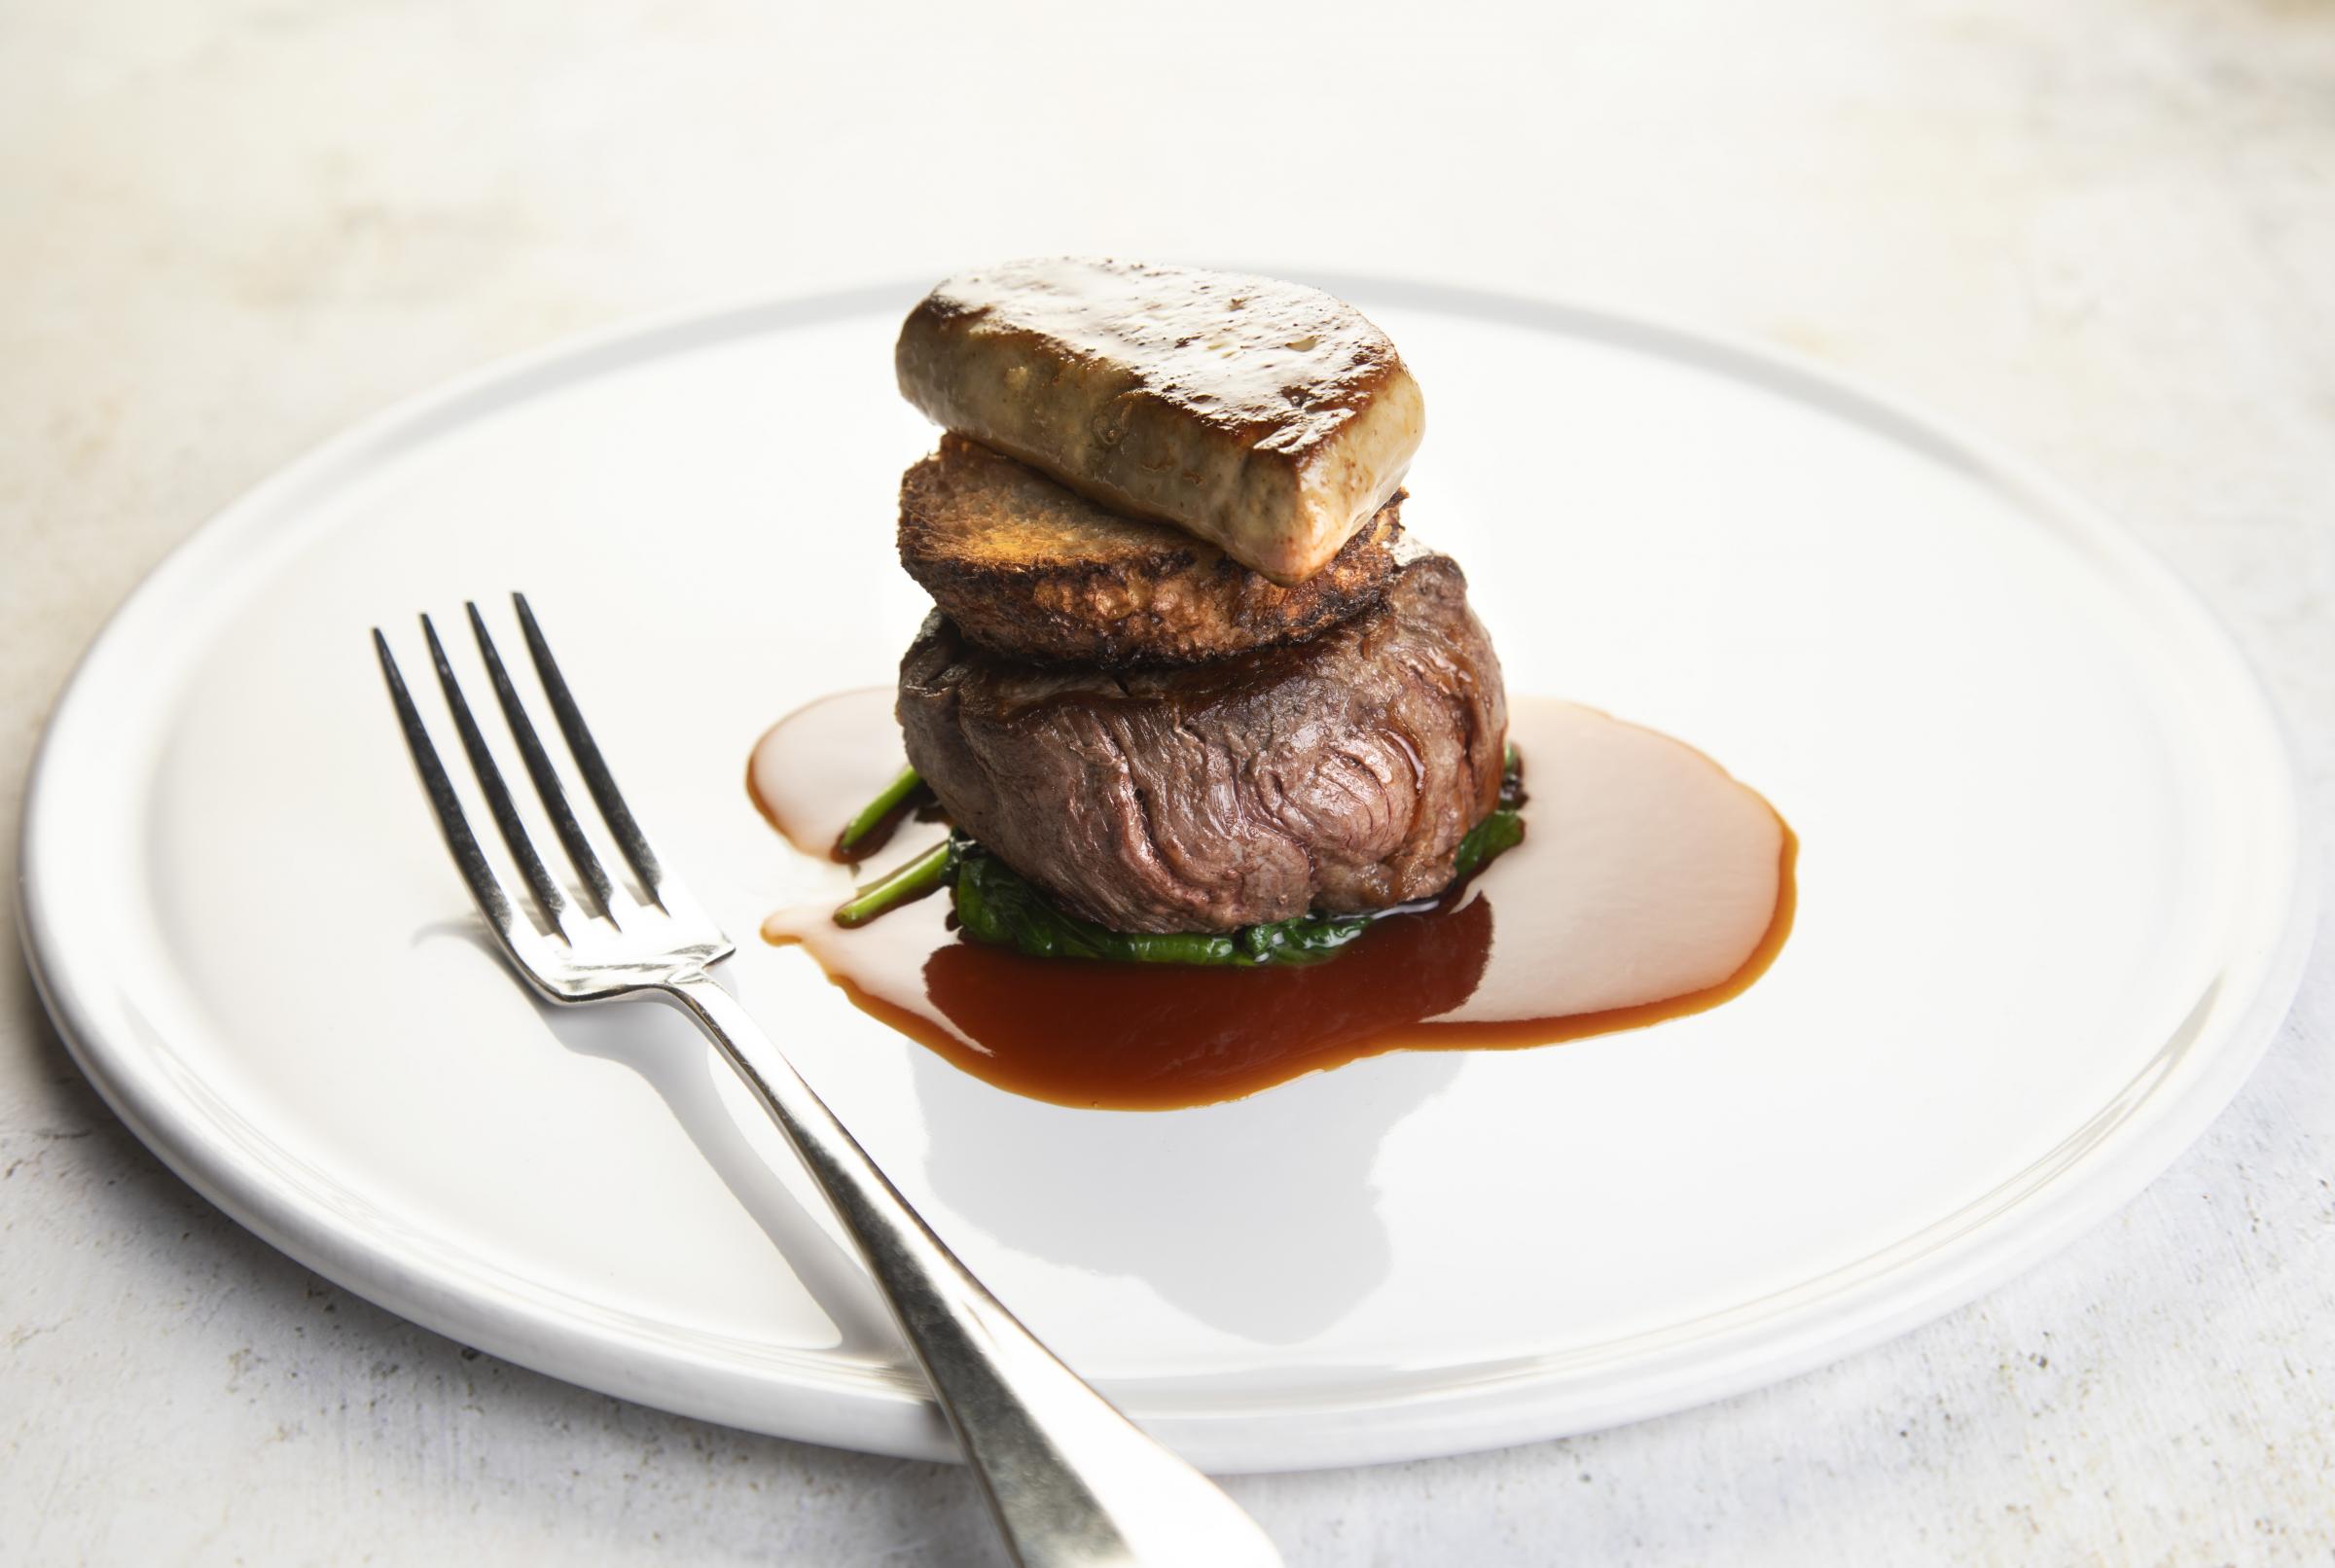 Gary Townsend's recipe: Beef Tournedos Rossini with Madeira sauce